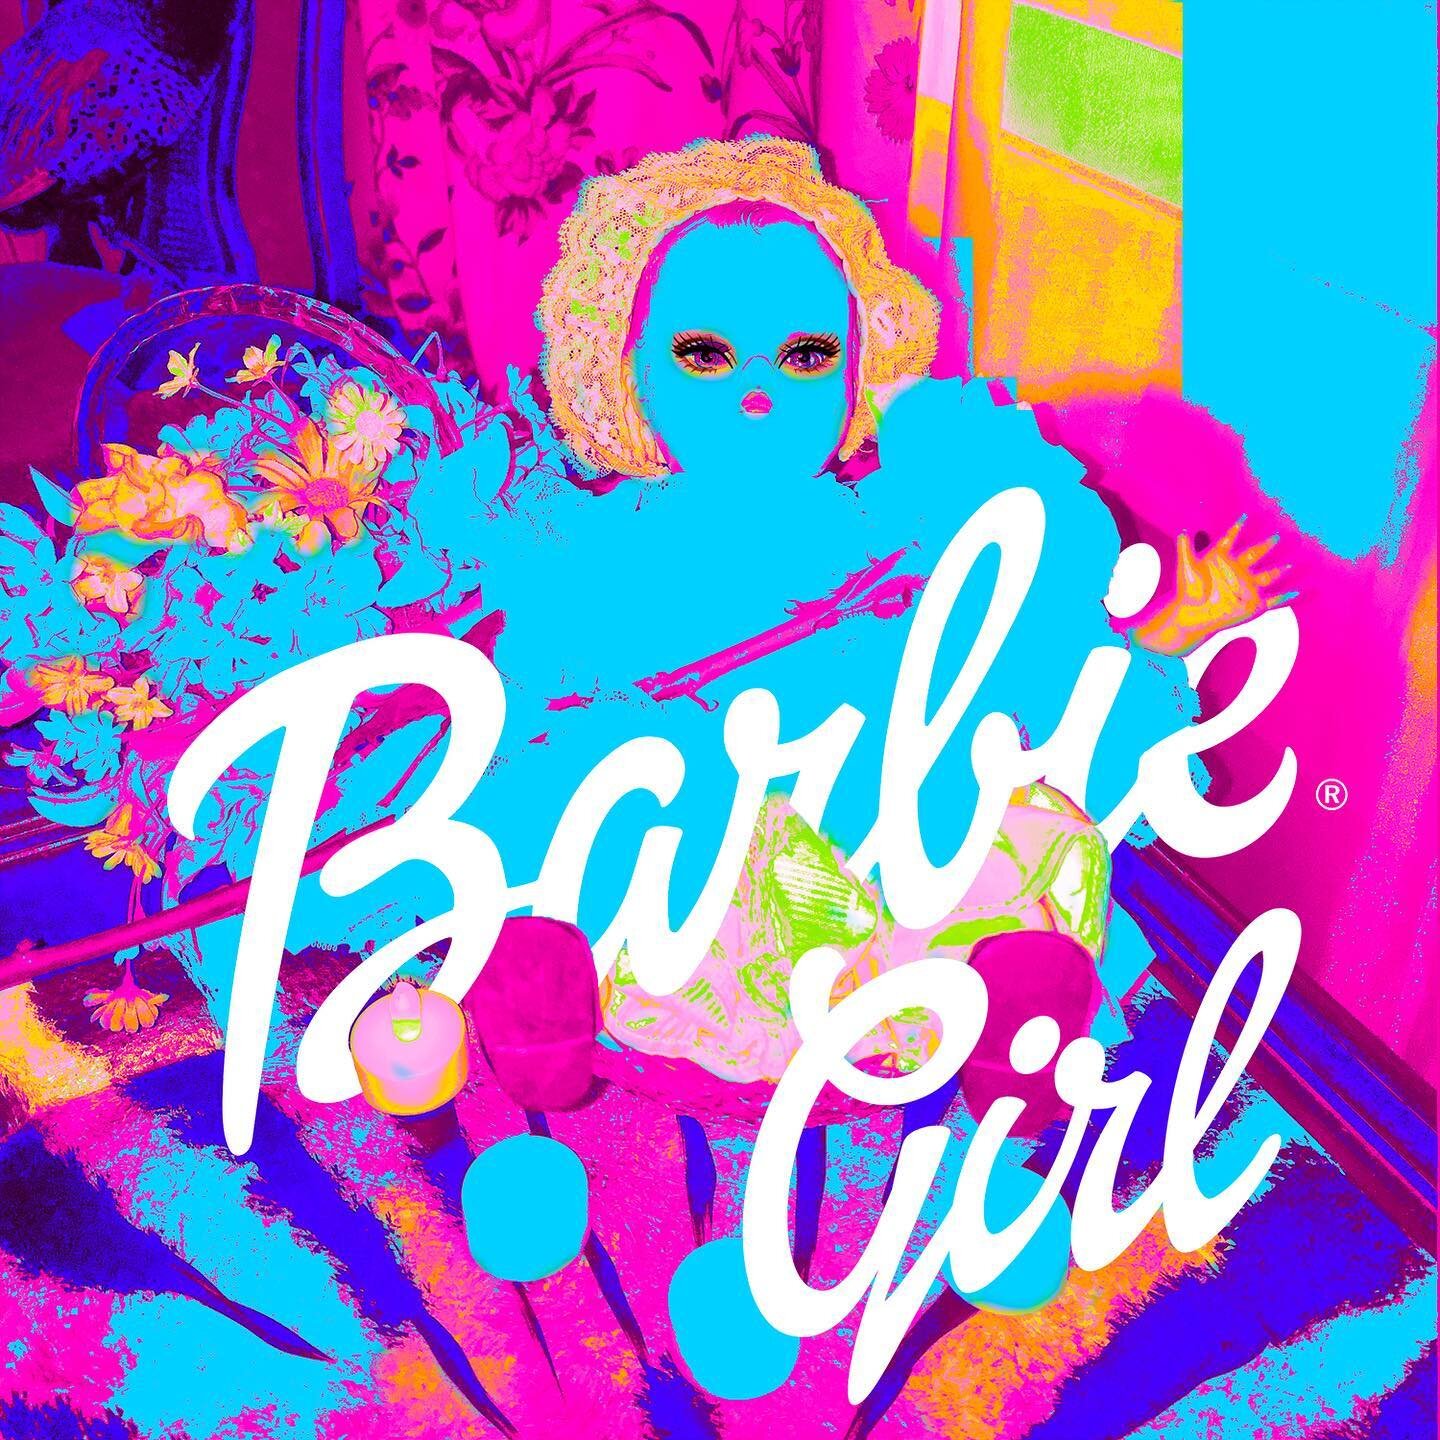 Faux album cover, inspired by Barbie